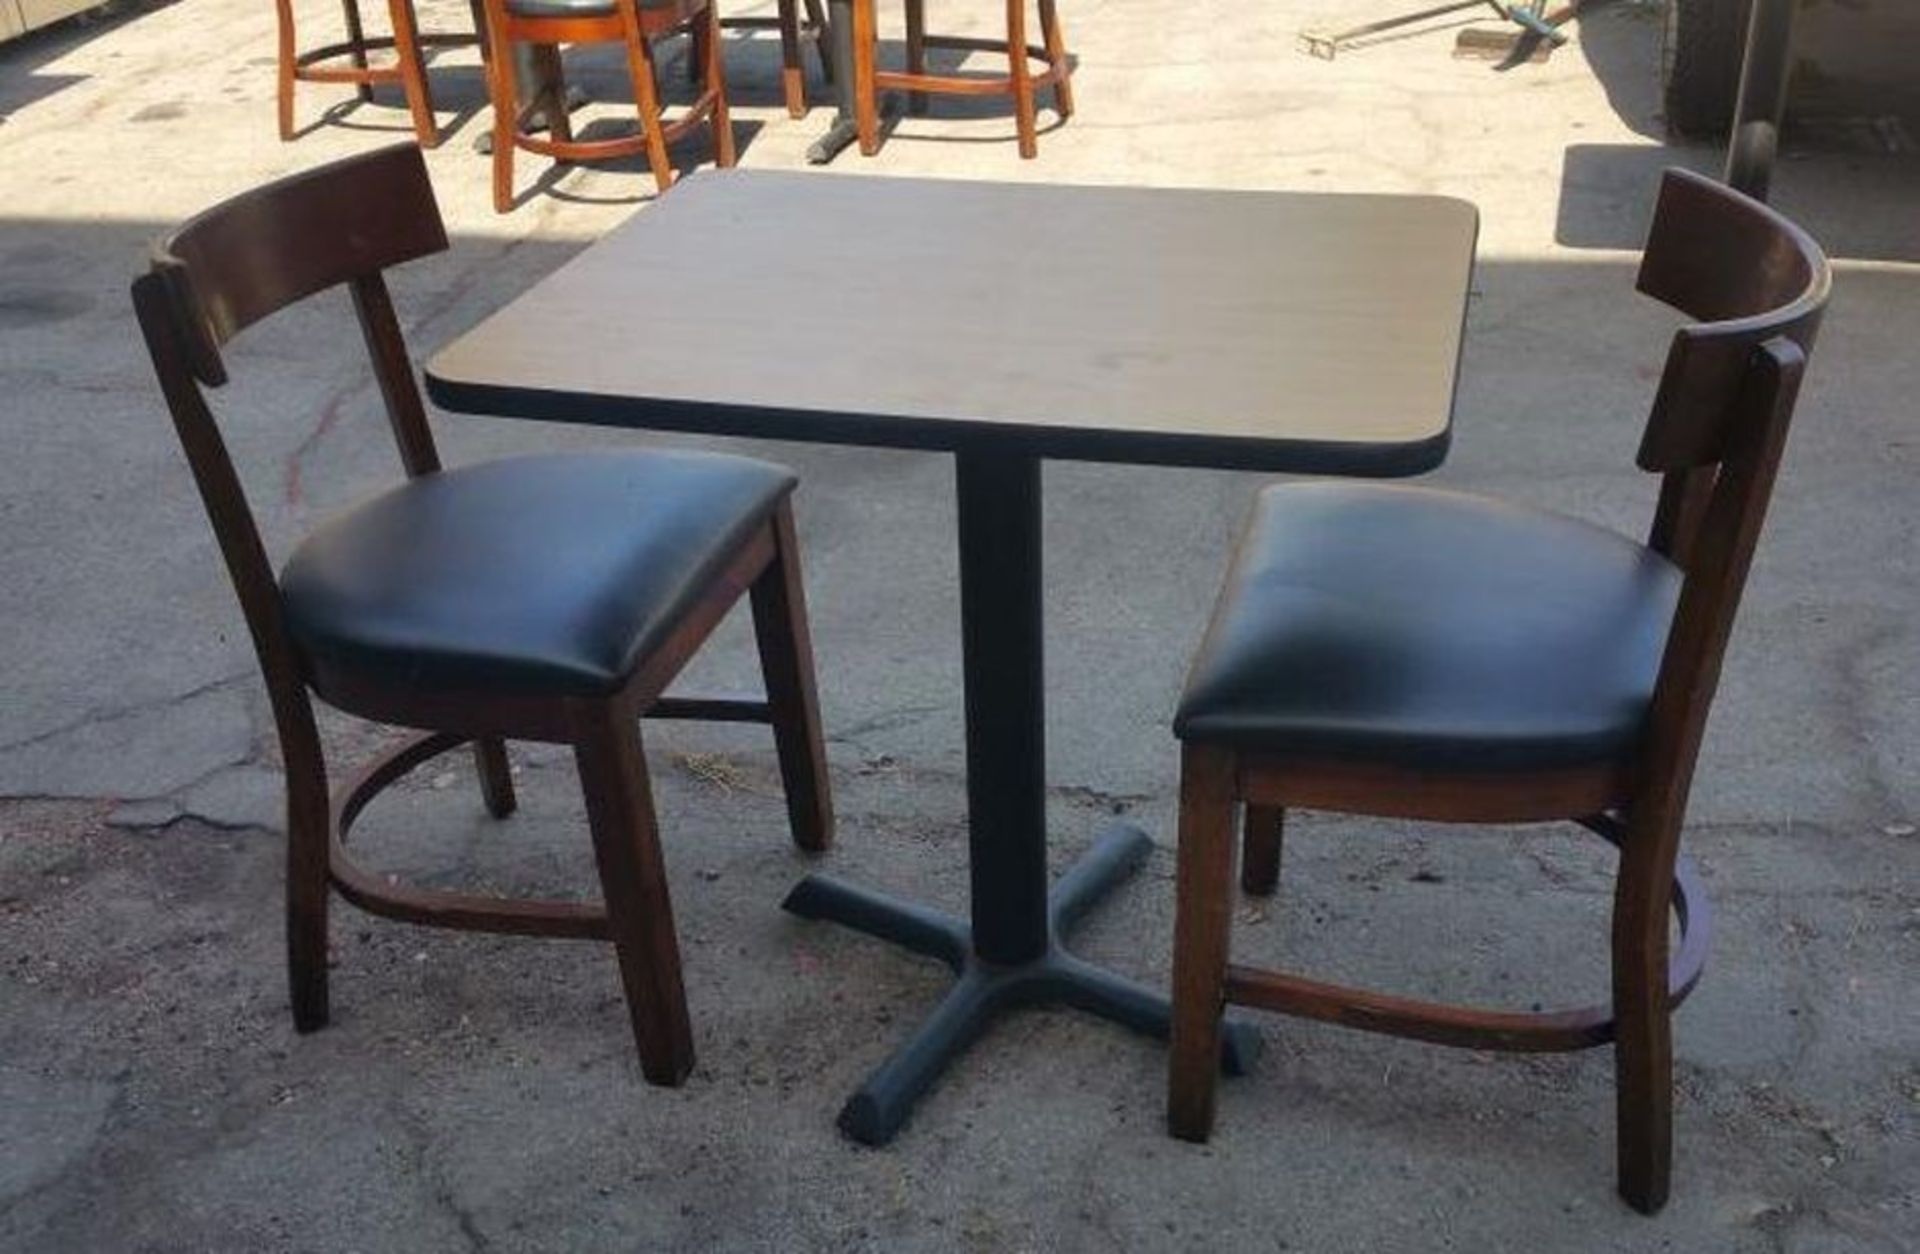 TABLE WITH TWO CHAIRS